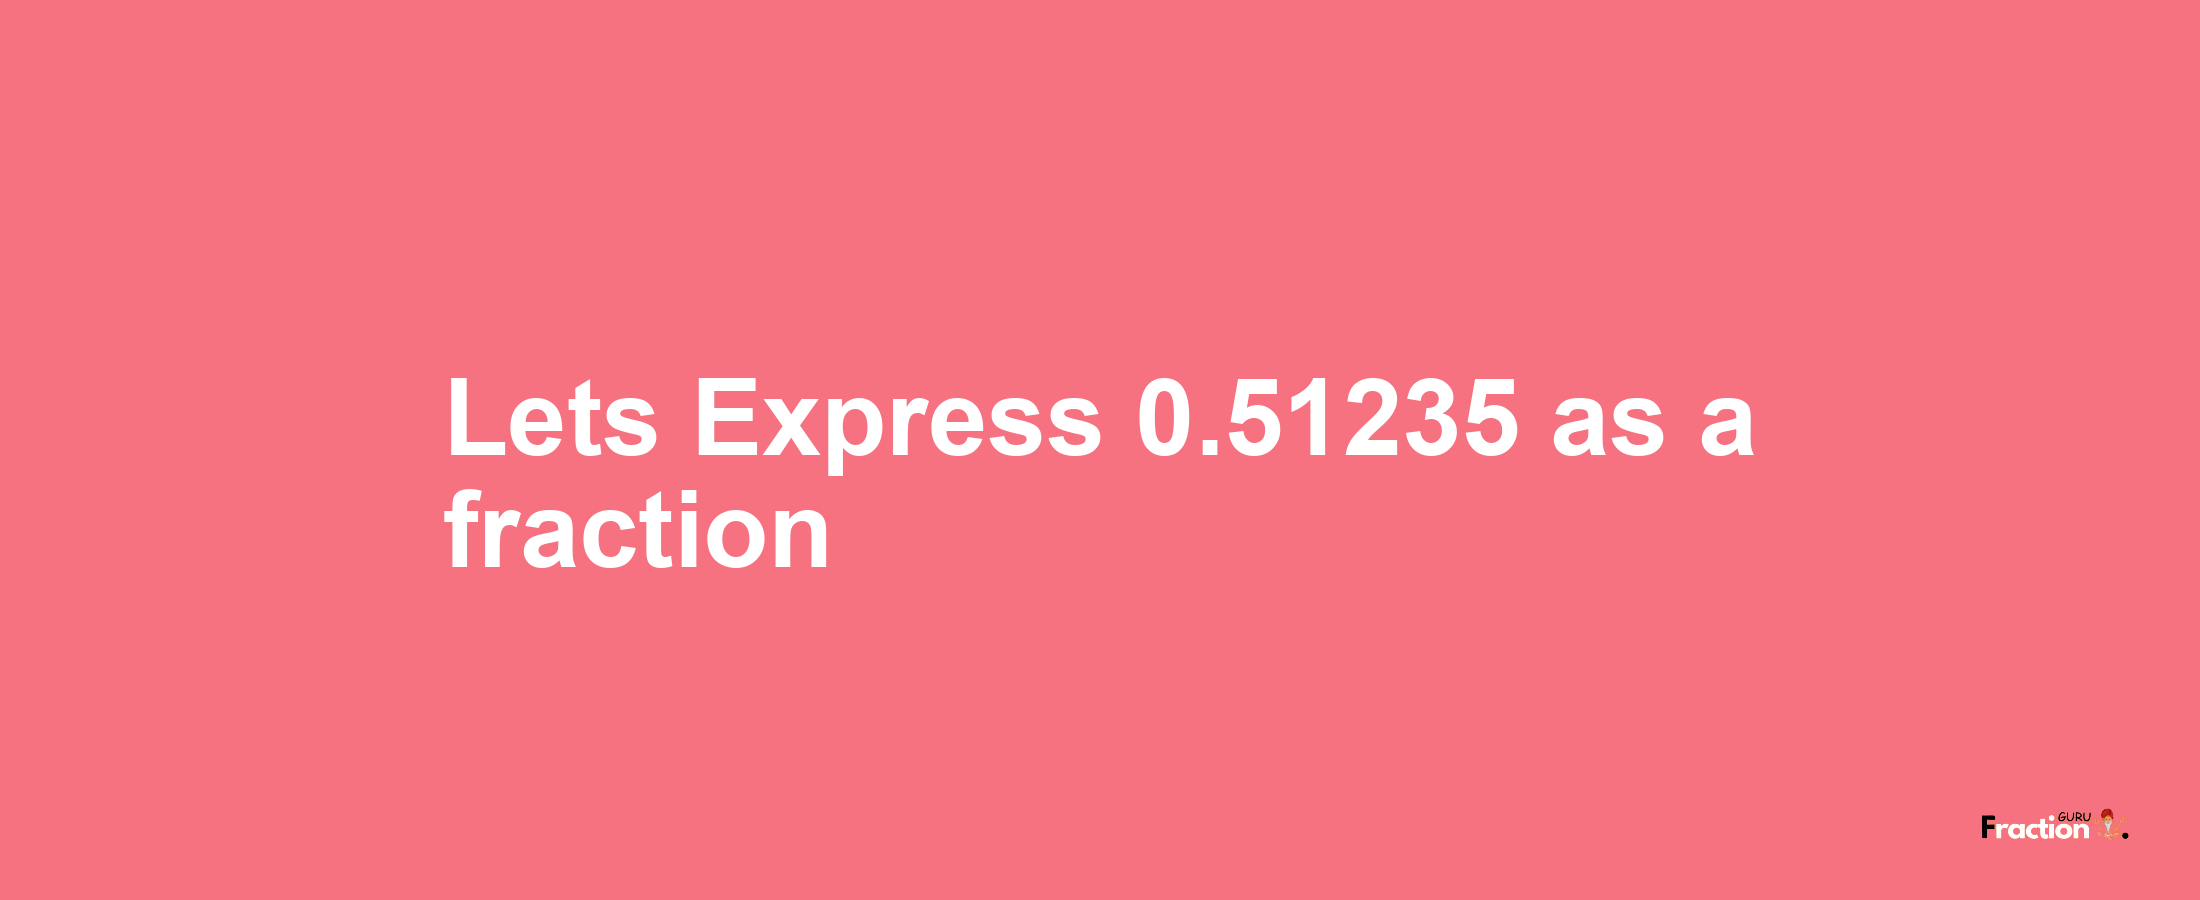 Lets Express 0.51235 as afraction